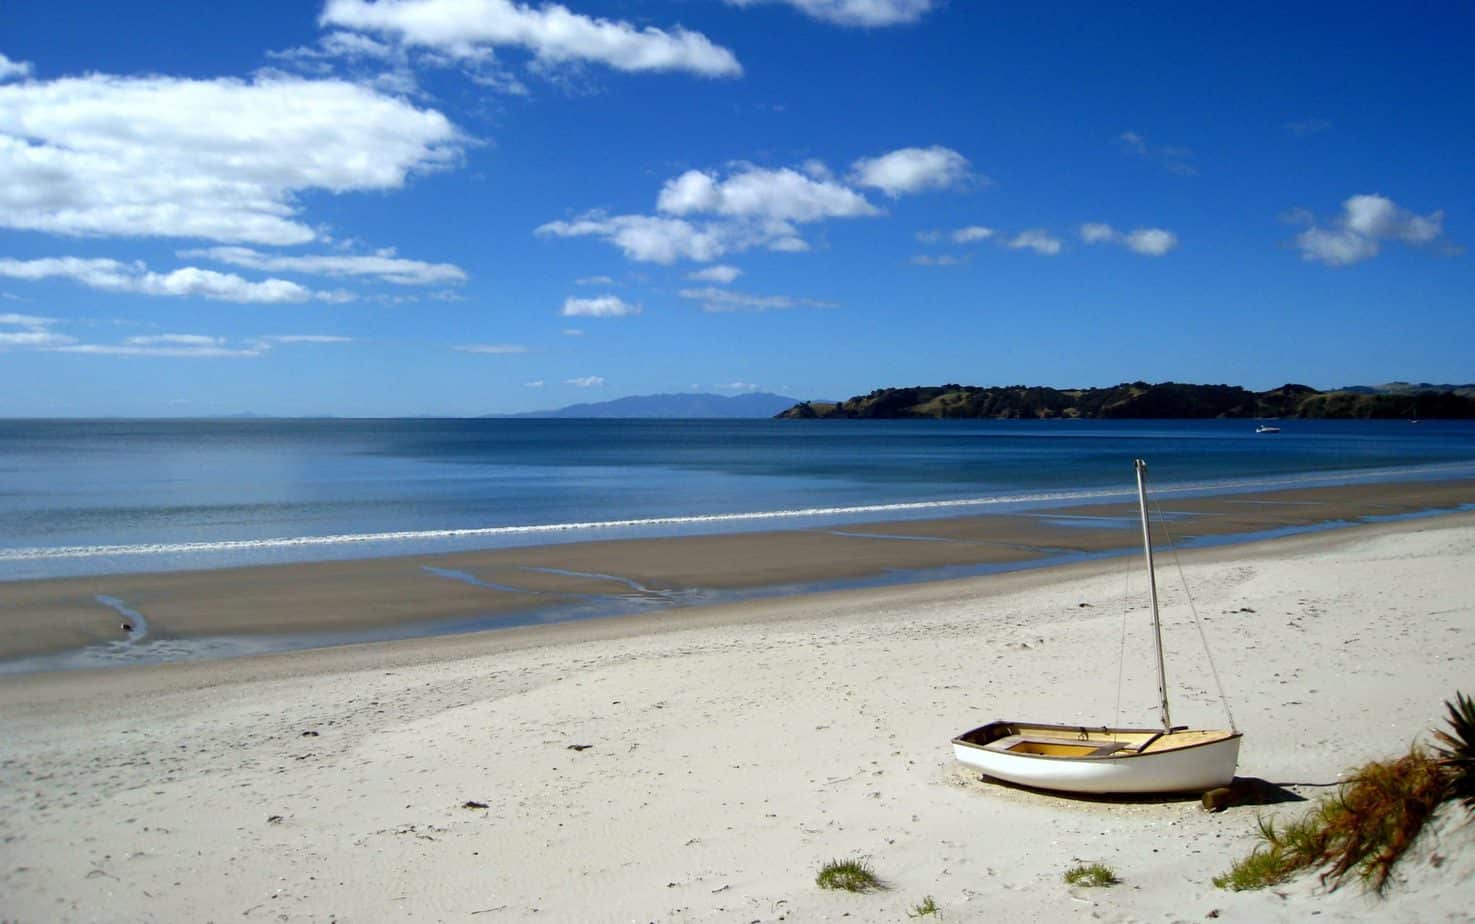 A white boat sits on a sandy beach with no people.